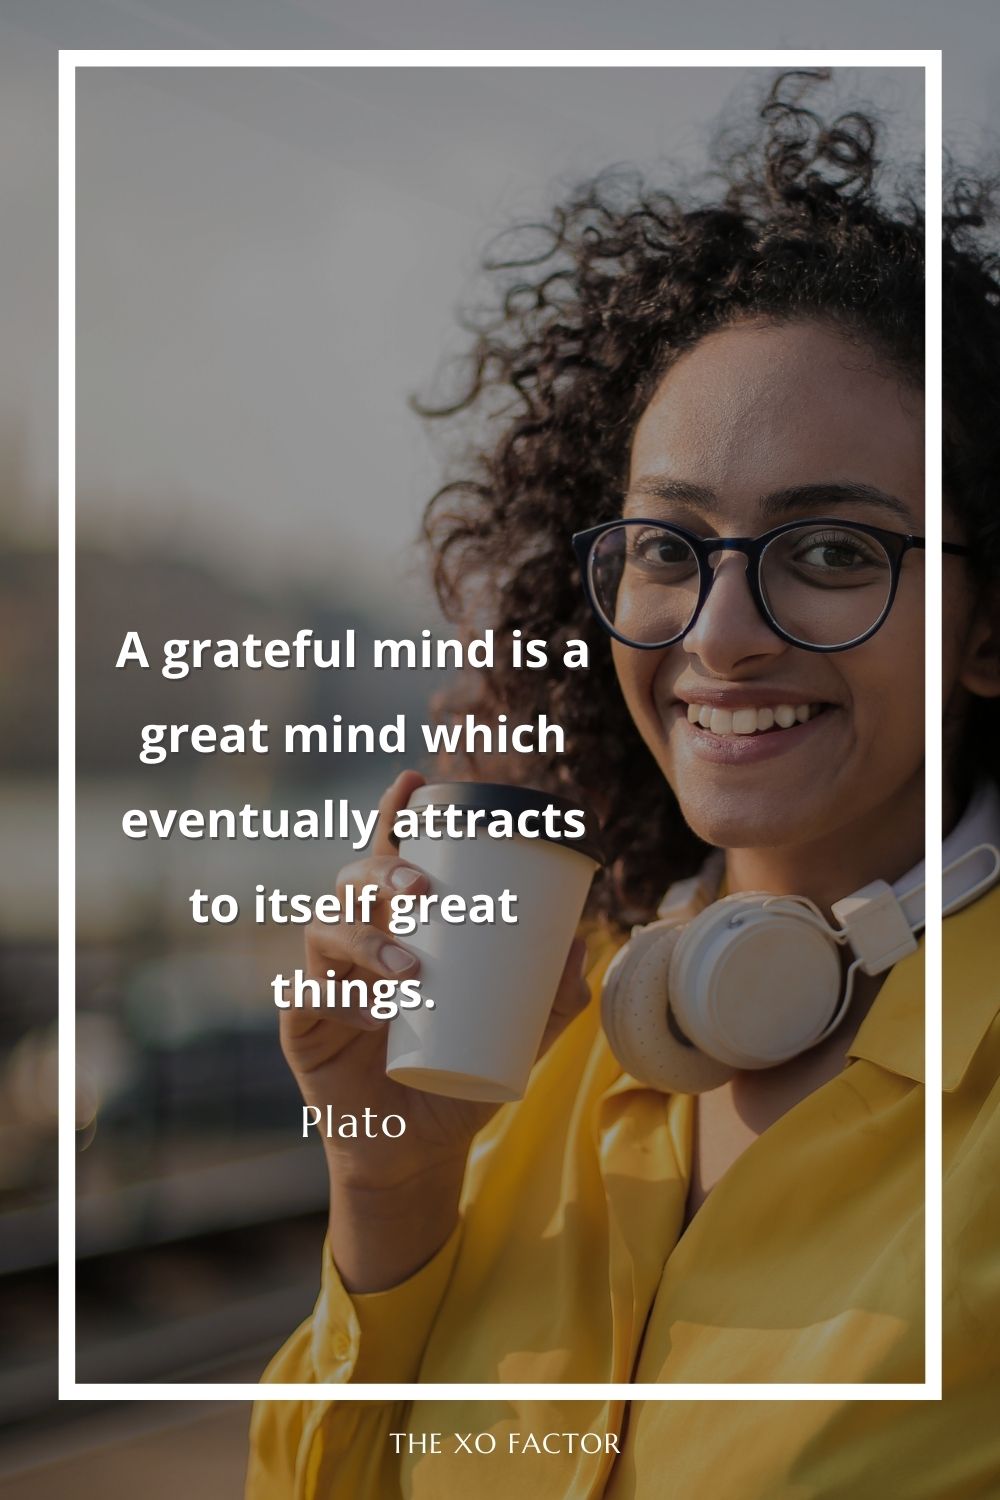 A grateful mind is a great mind which eventually attracts to itself great things.